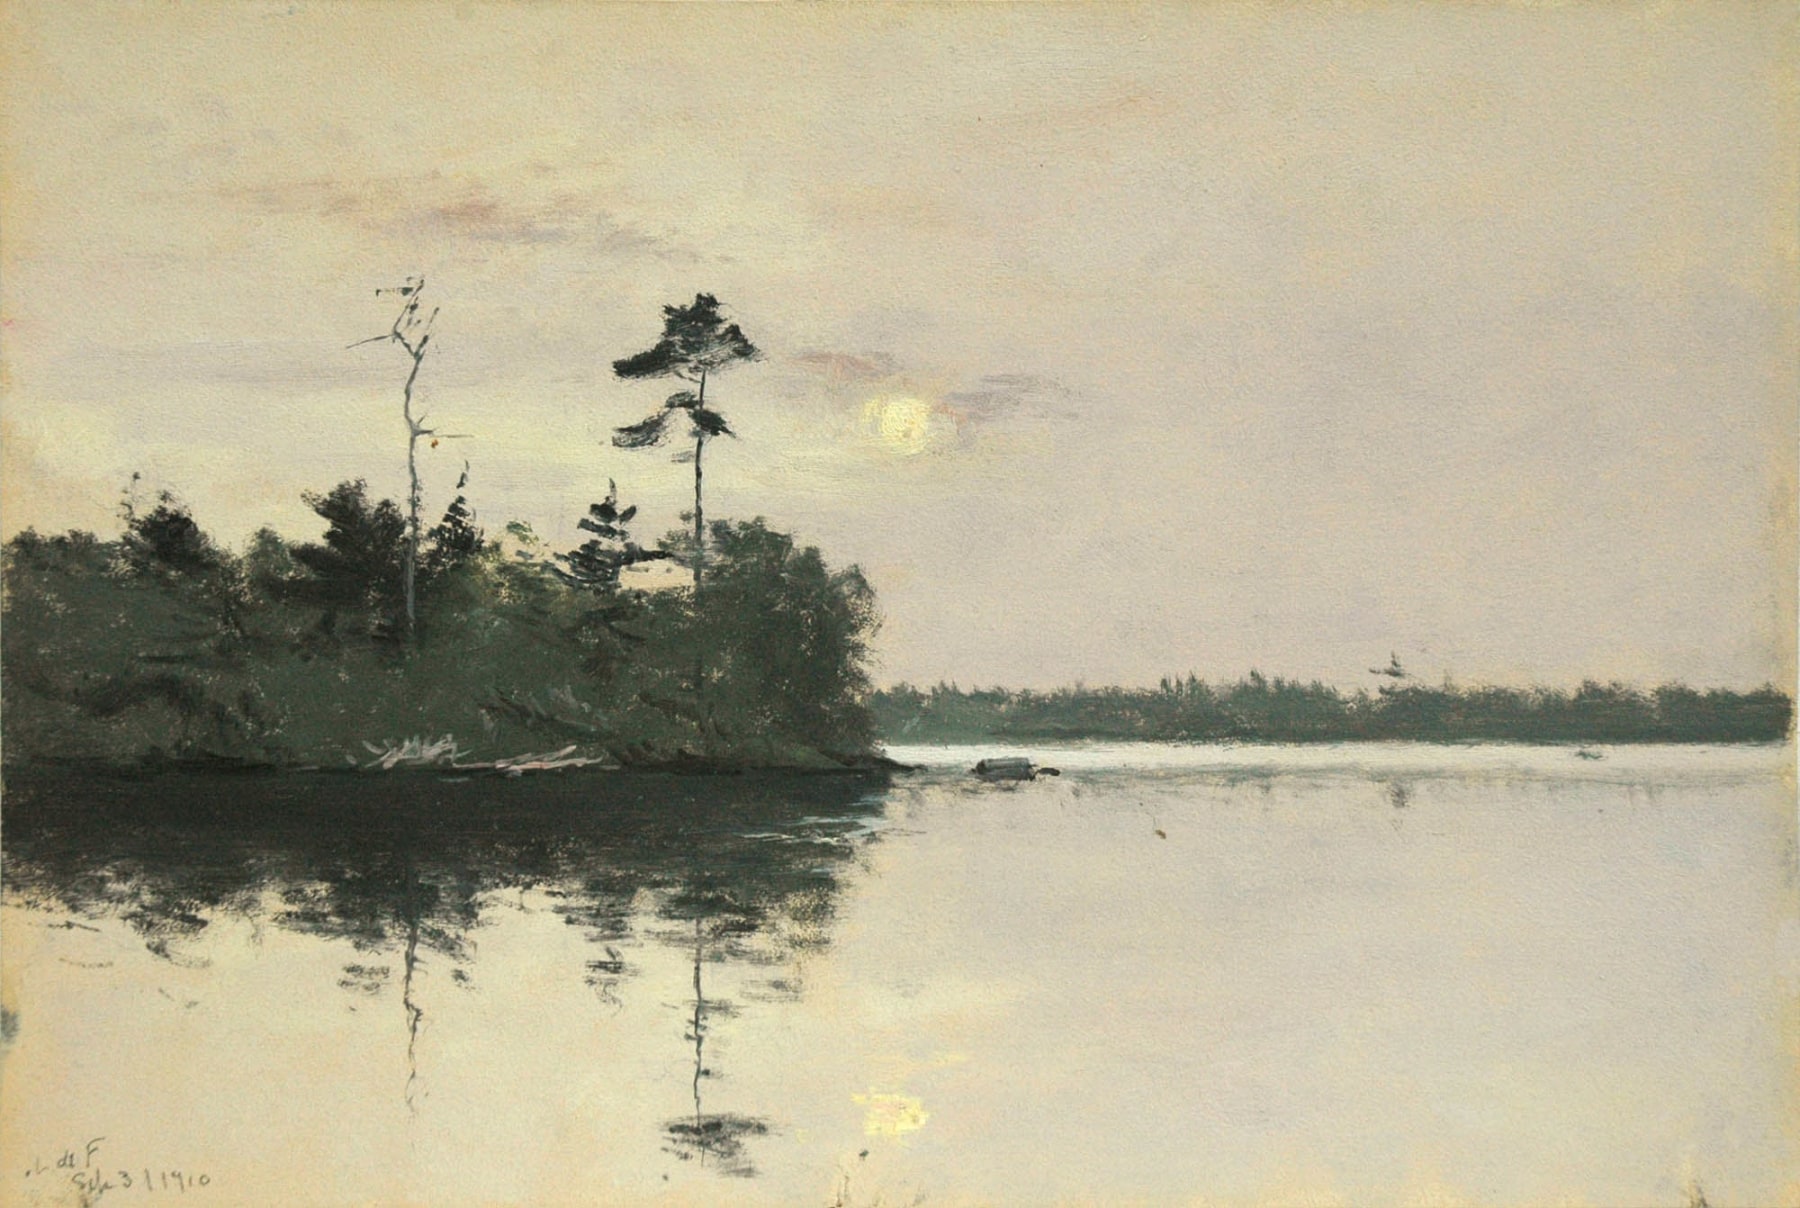 Lockwood De Forest, Daylight Full Moon with Reflection, Sept. 3, 1910.